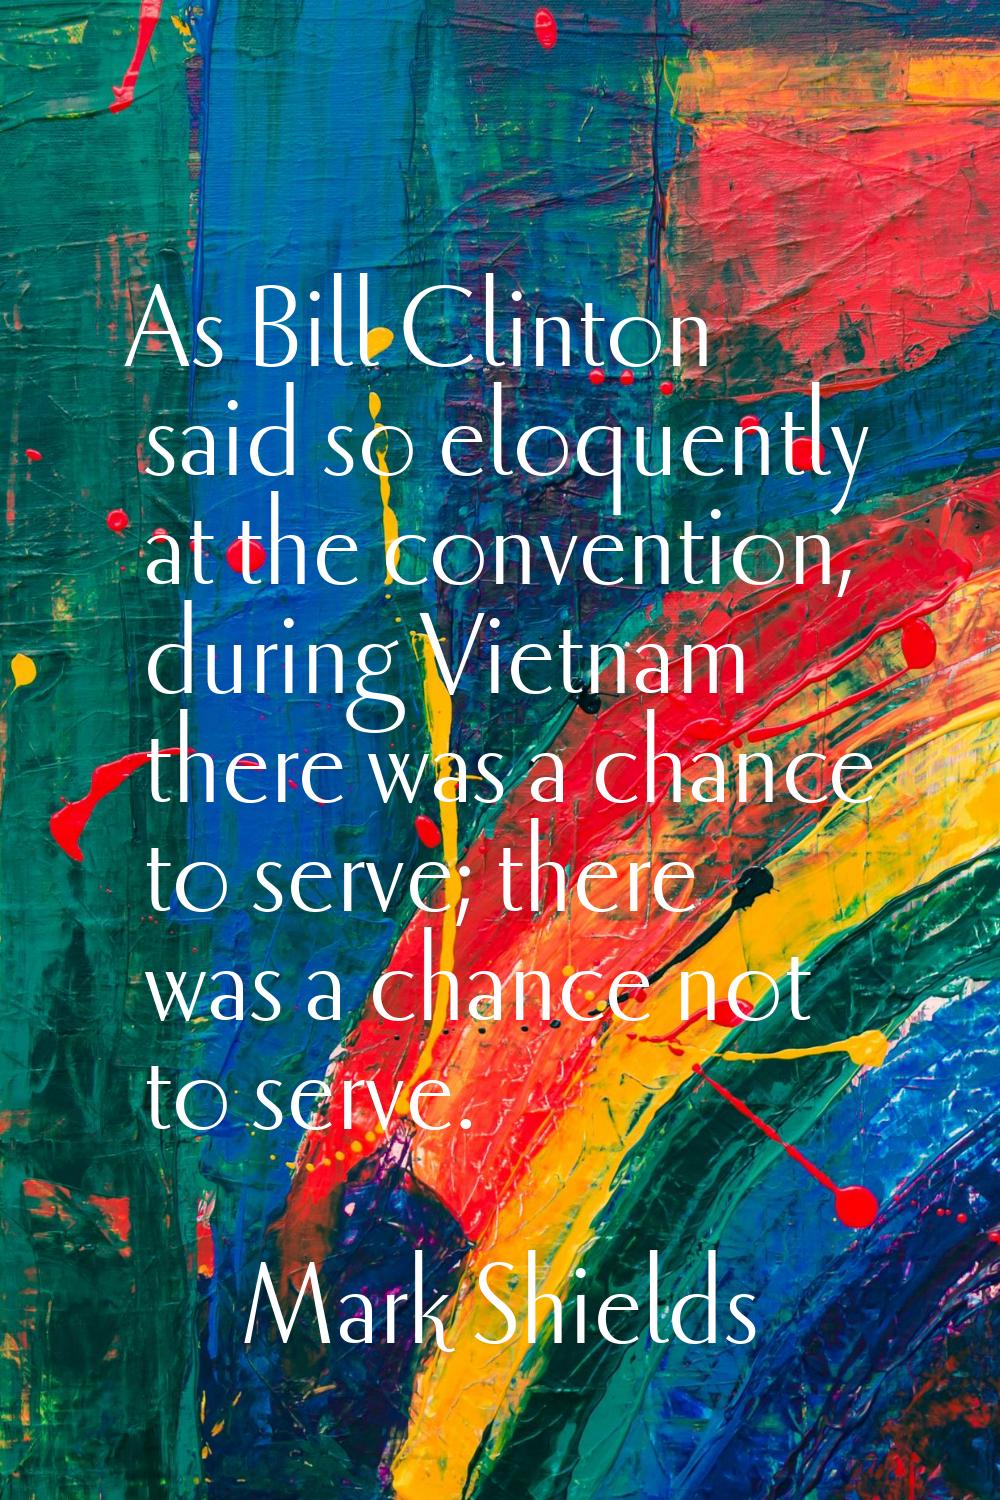 As Bill Clinton said so eloquently at the convention, during Vietnam there was a chance to serve; t